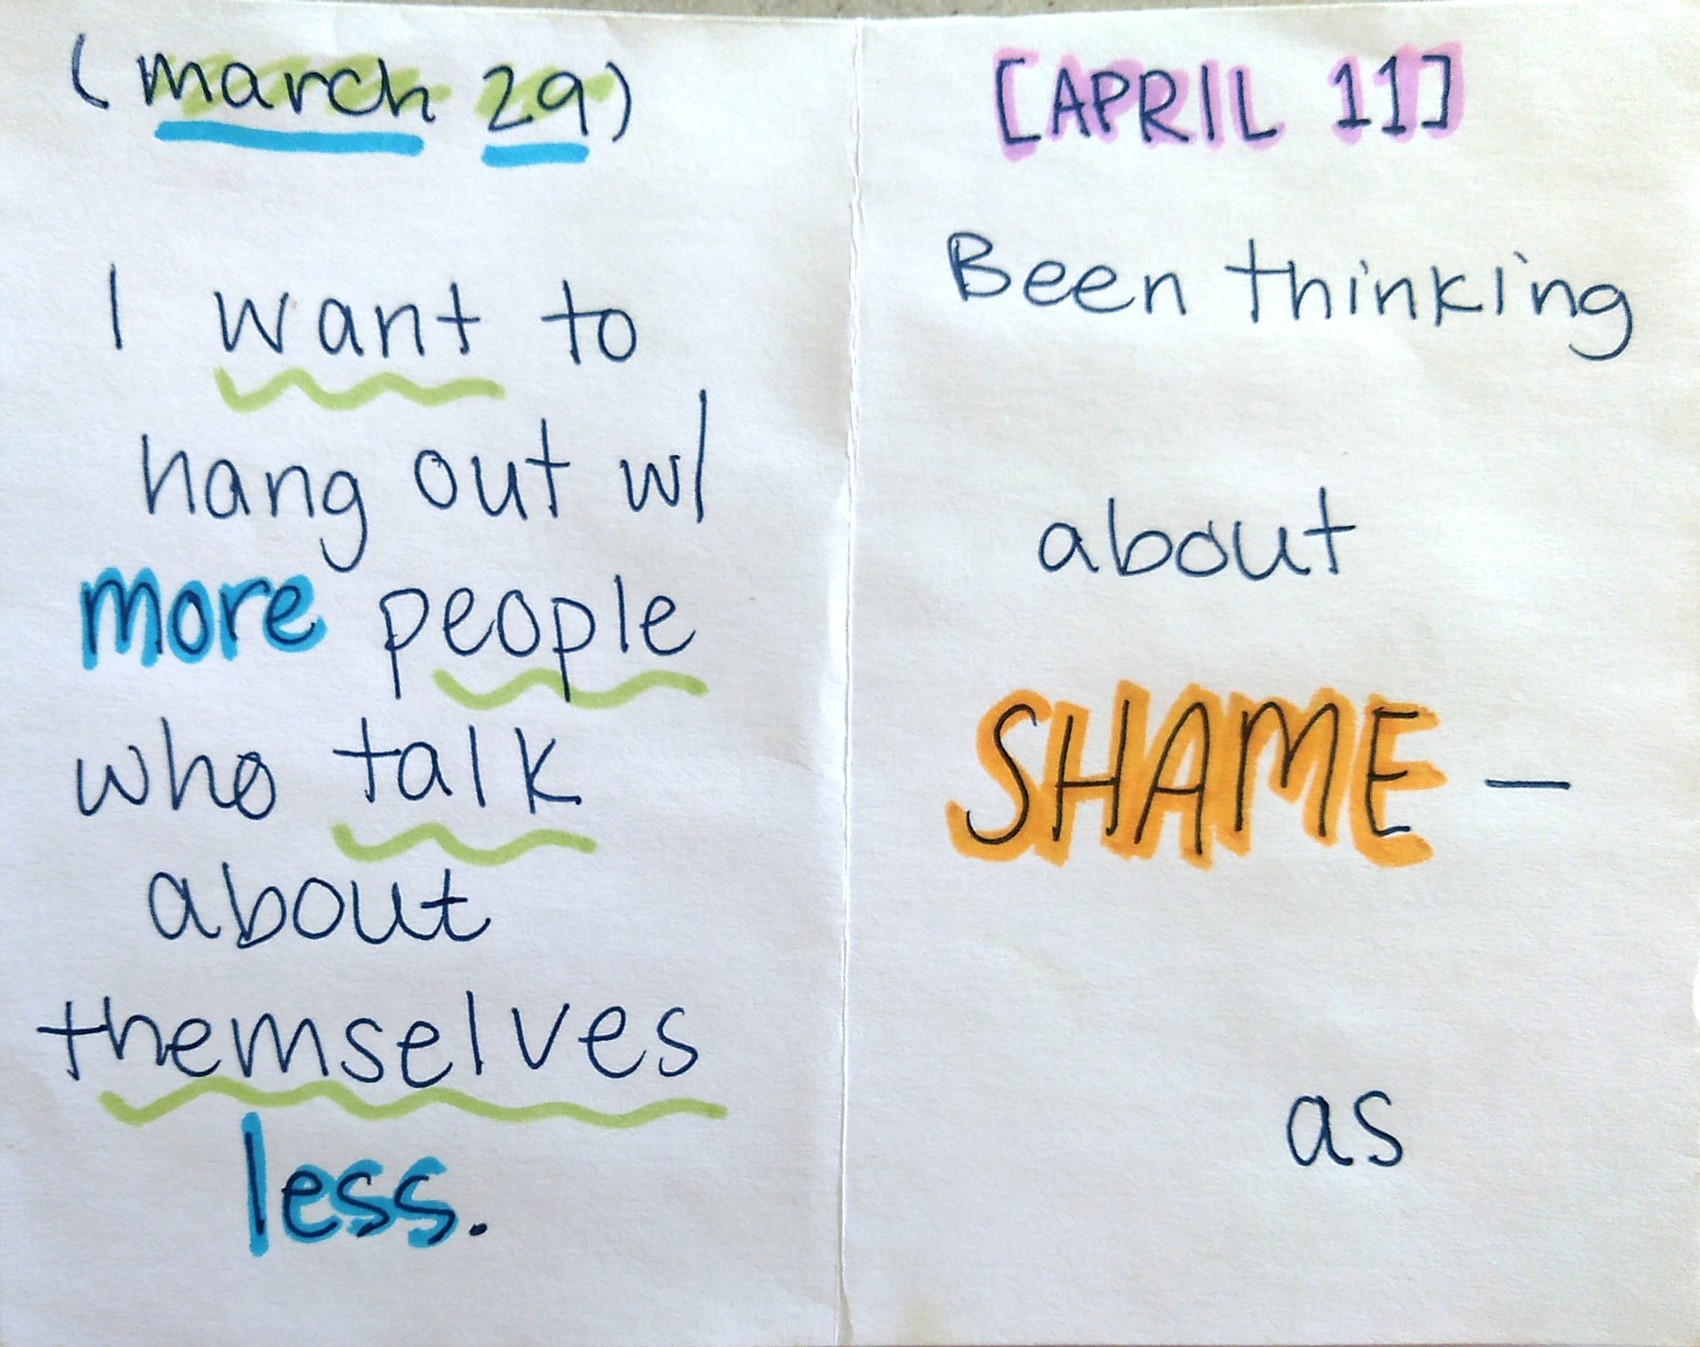 march 29: i want to hang out with more people who talk about themselves less. april 11: been thinking about shame, as